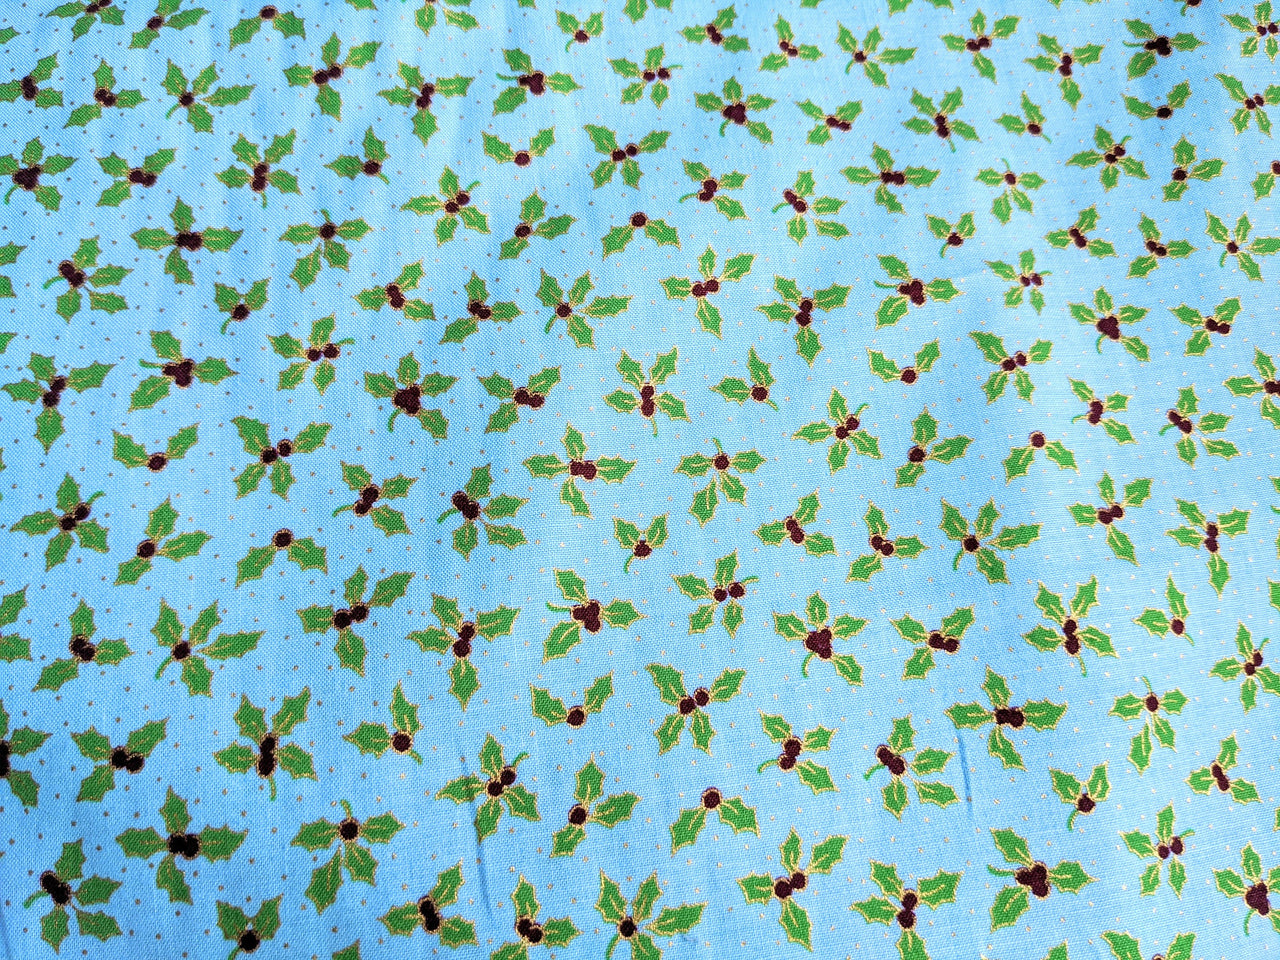 Turquoise Green Cotton Holly Berry Christmas Fabric, Festive Fabric, Holiday Fabric